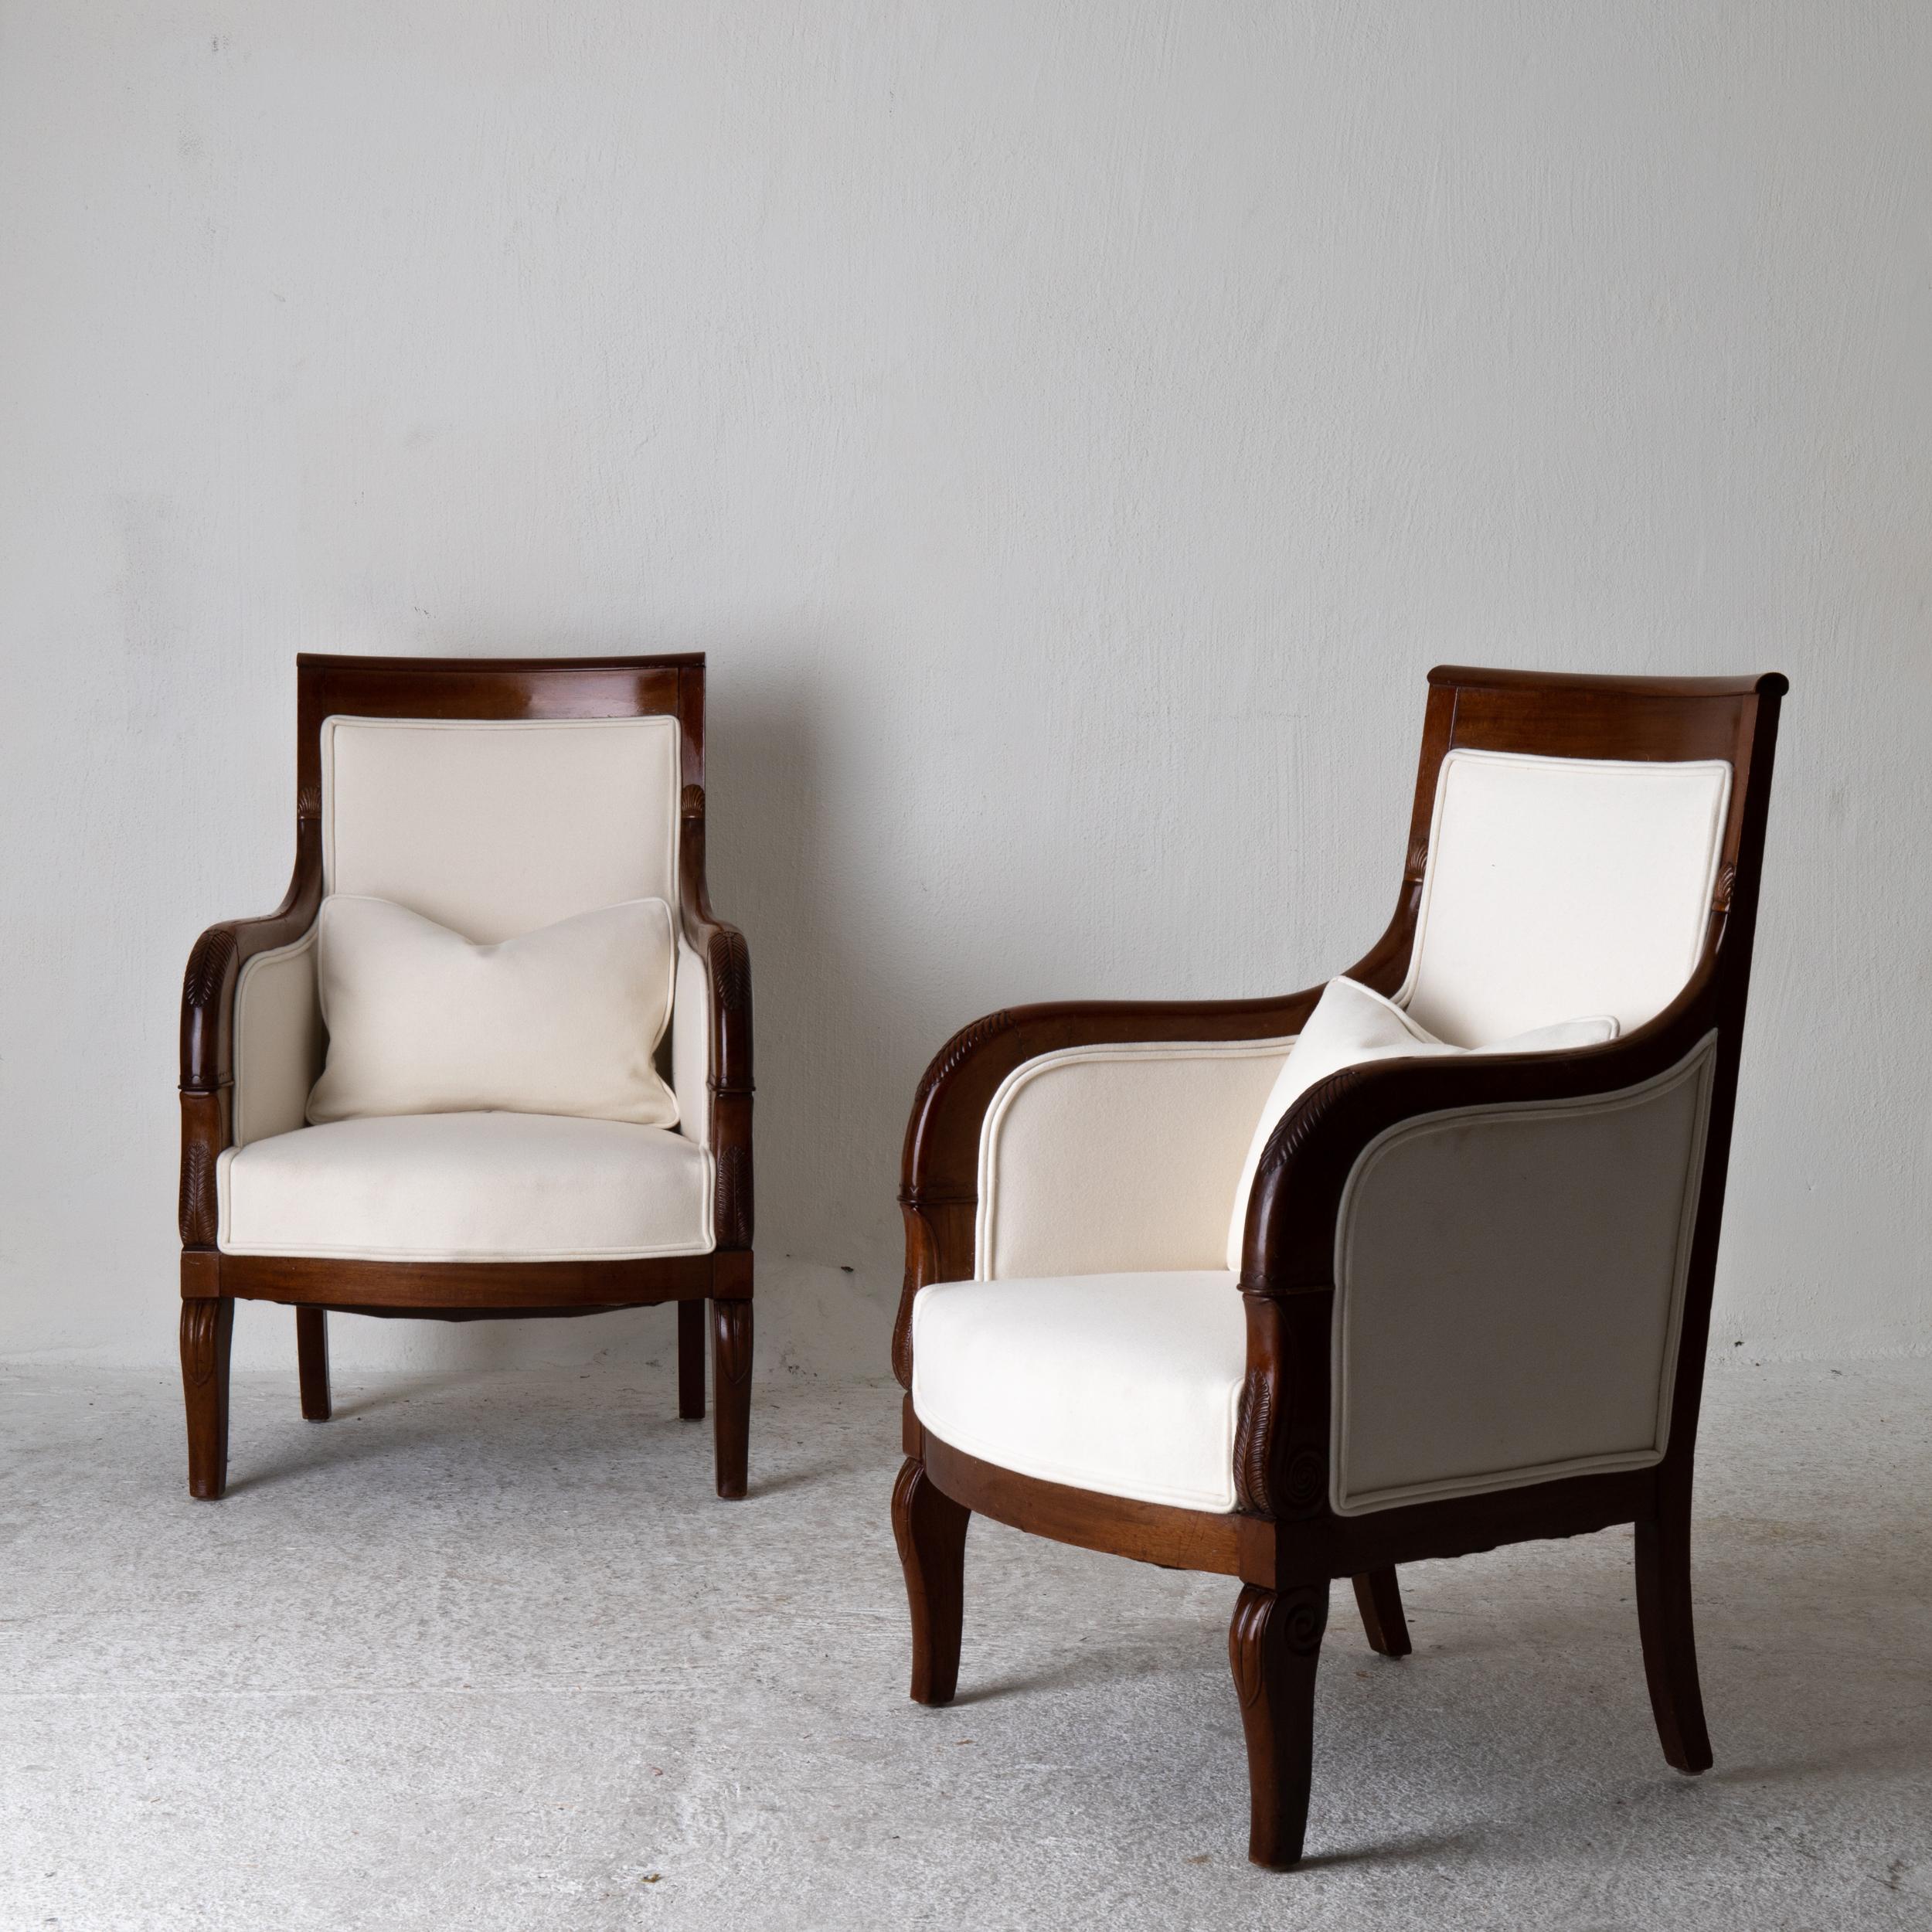 Chairs pair of Bergeres 19th century Directoire French mahogany white, France. A pair of lounge chairs made in France during the early 19th century. Frame in mahogany. Upholstered in a cream white wool fabric. Loose decorative cushion.